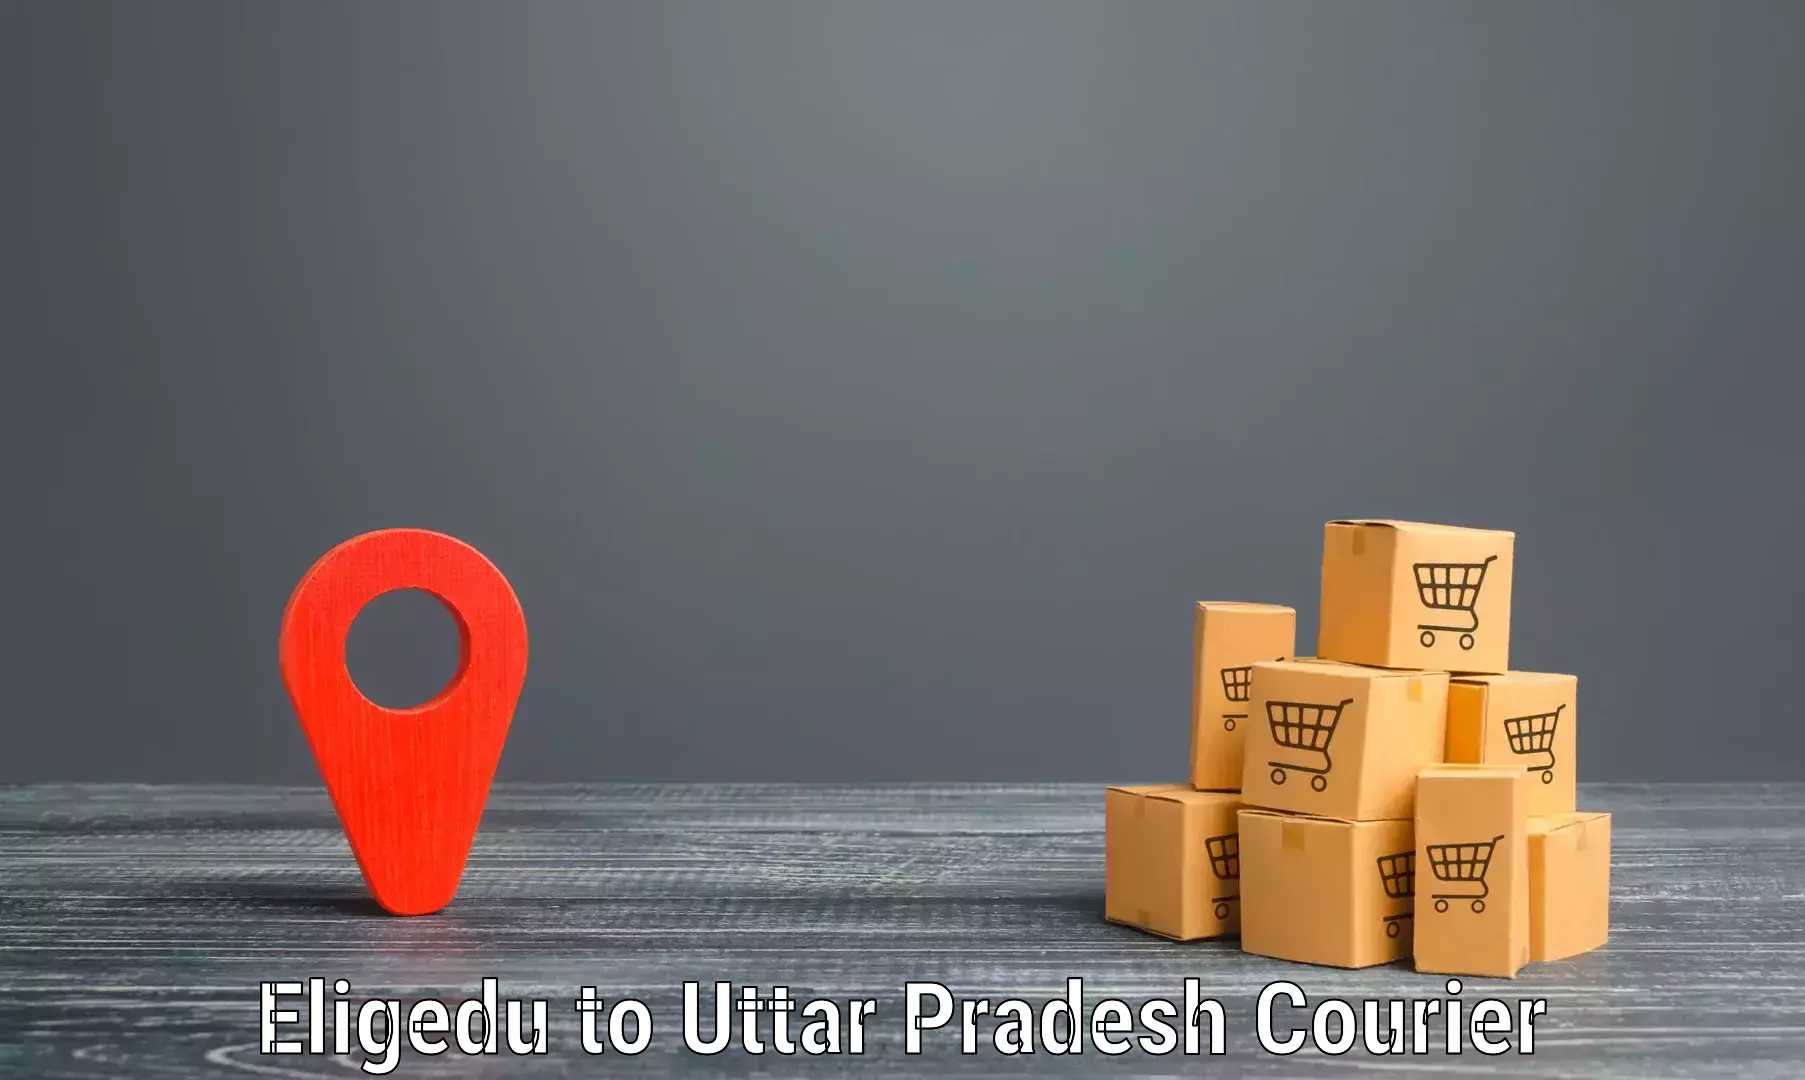 Reliable freight solutions Eligedu to Kheragarh